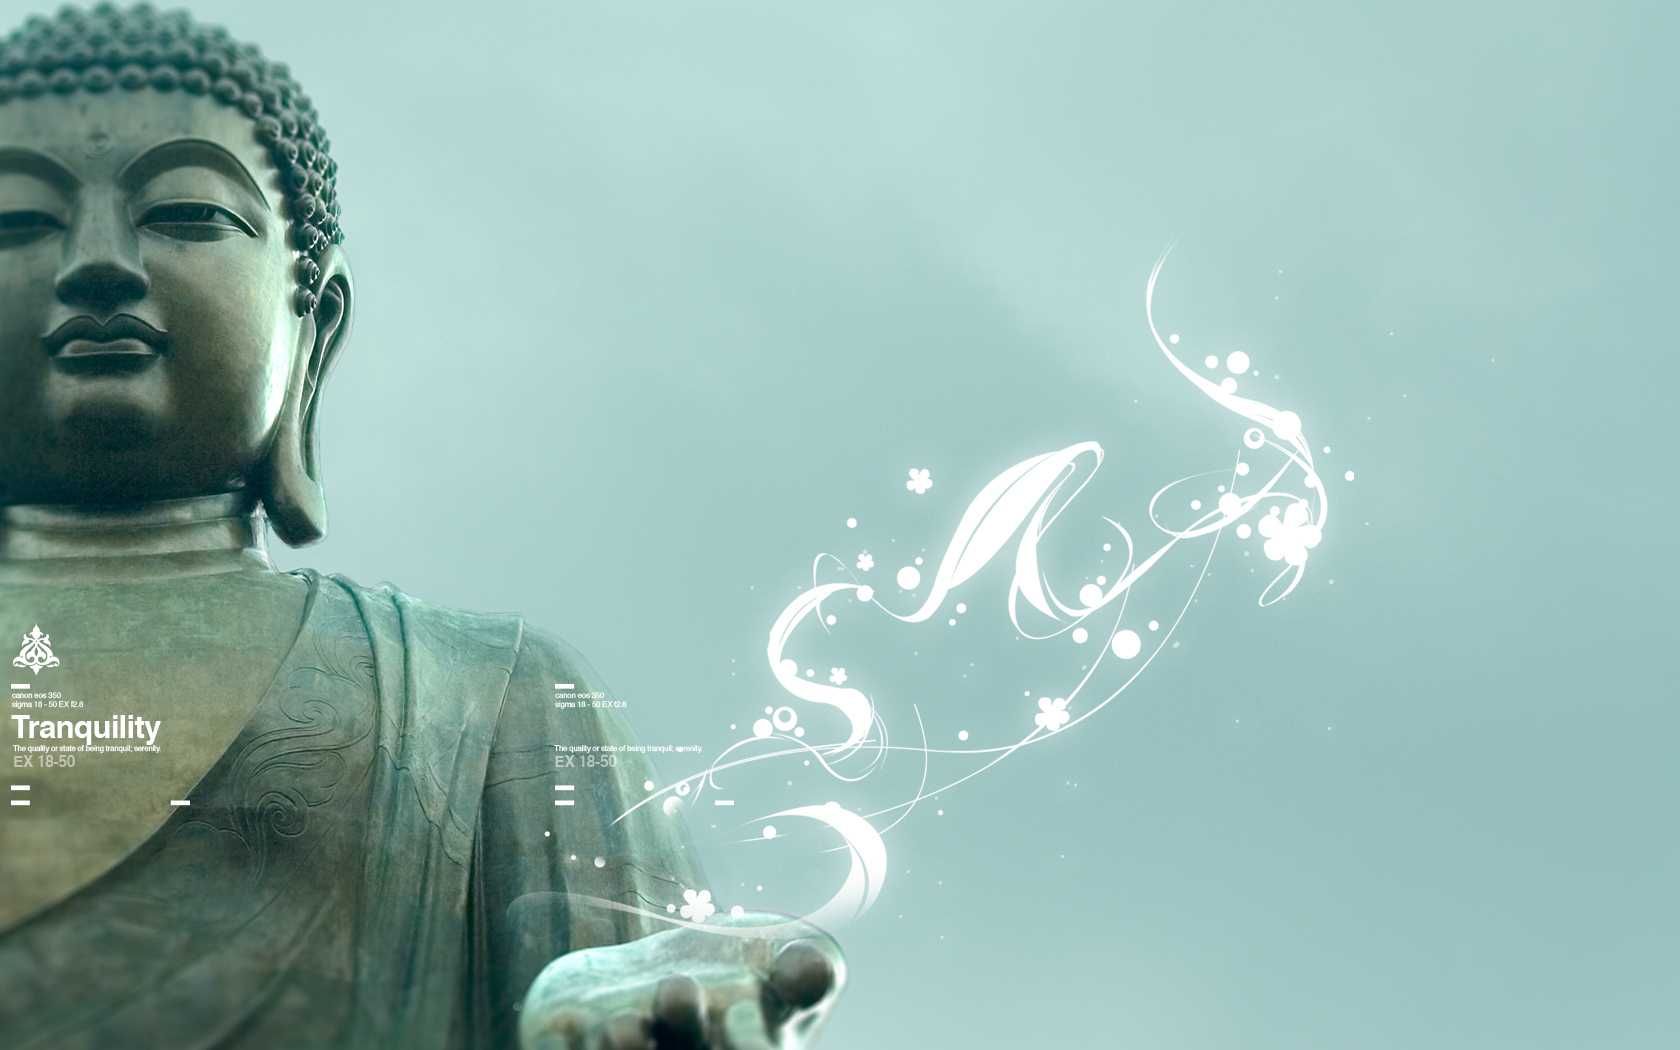 Buddha wallpaper for desktop and mobile in high resolution